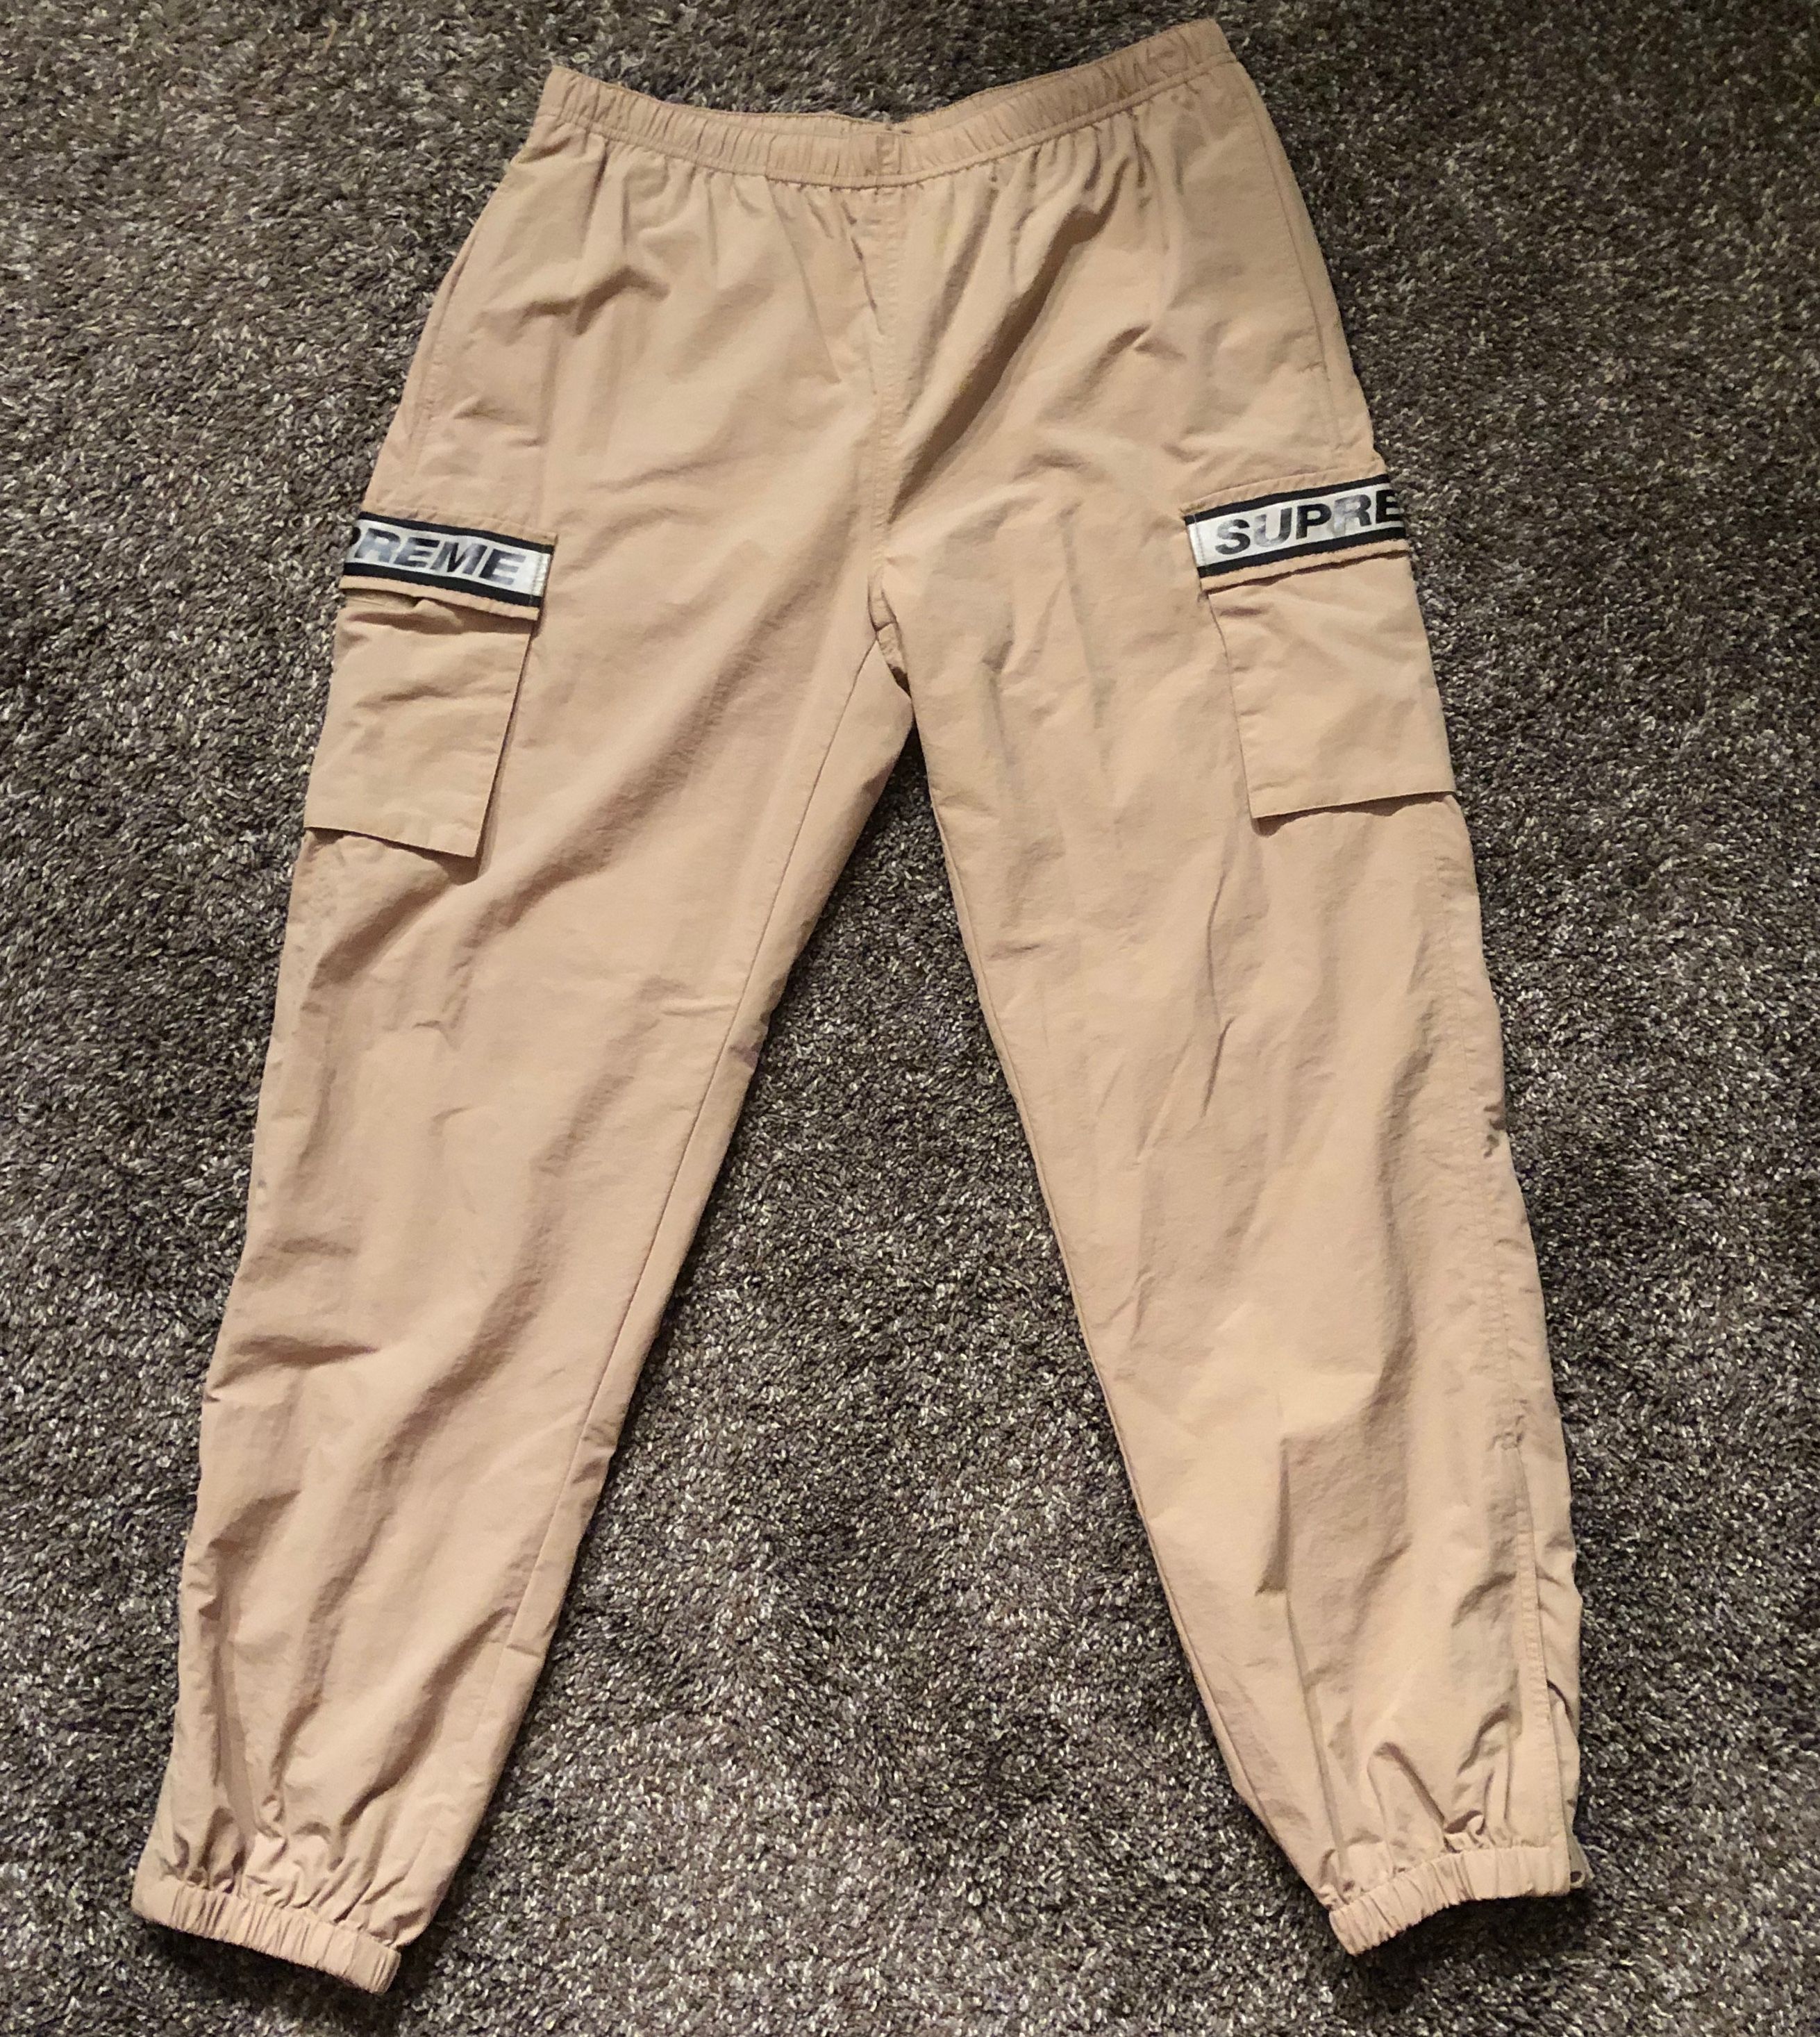 Supreme Reflective Taping Cargo Pant | Grailed